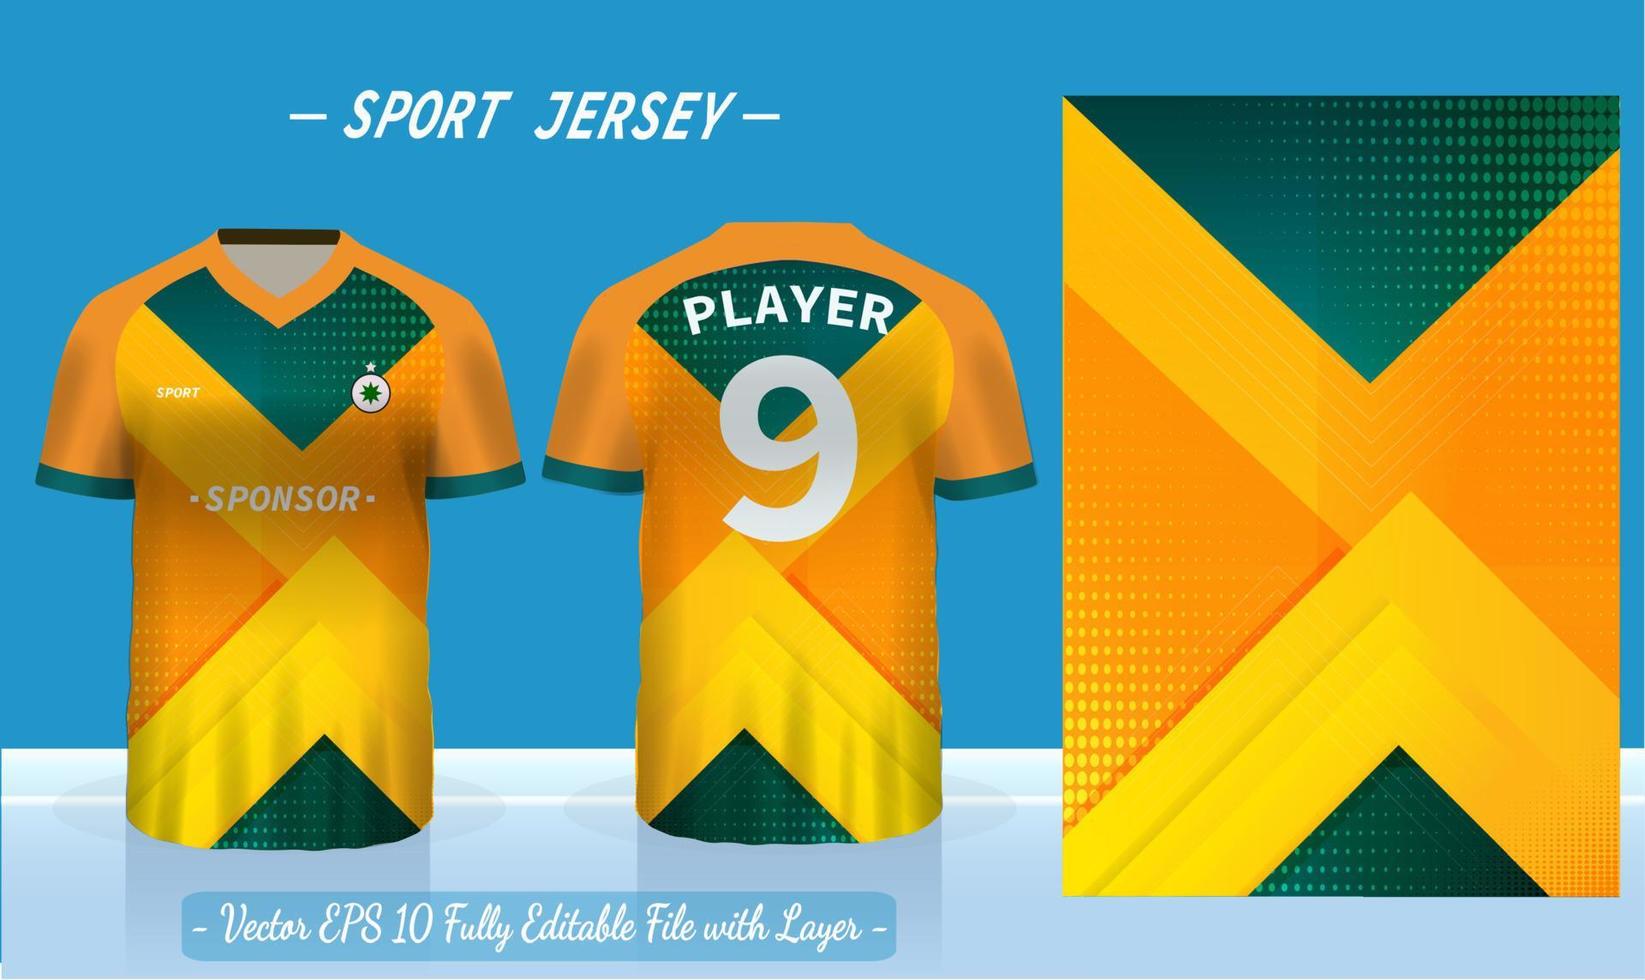 Sports jersey and t-shirt template sports jersey design vector mockup. Sports design for football, badminton, racing, gaming jersey